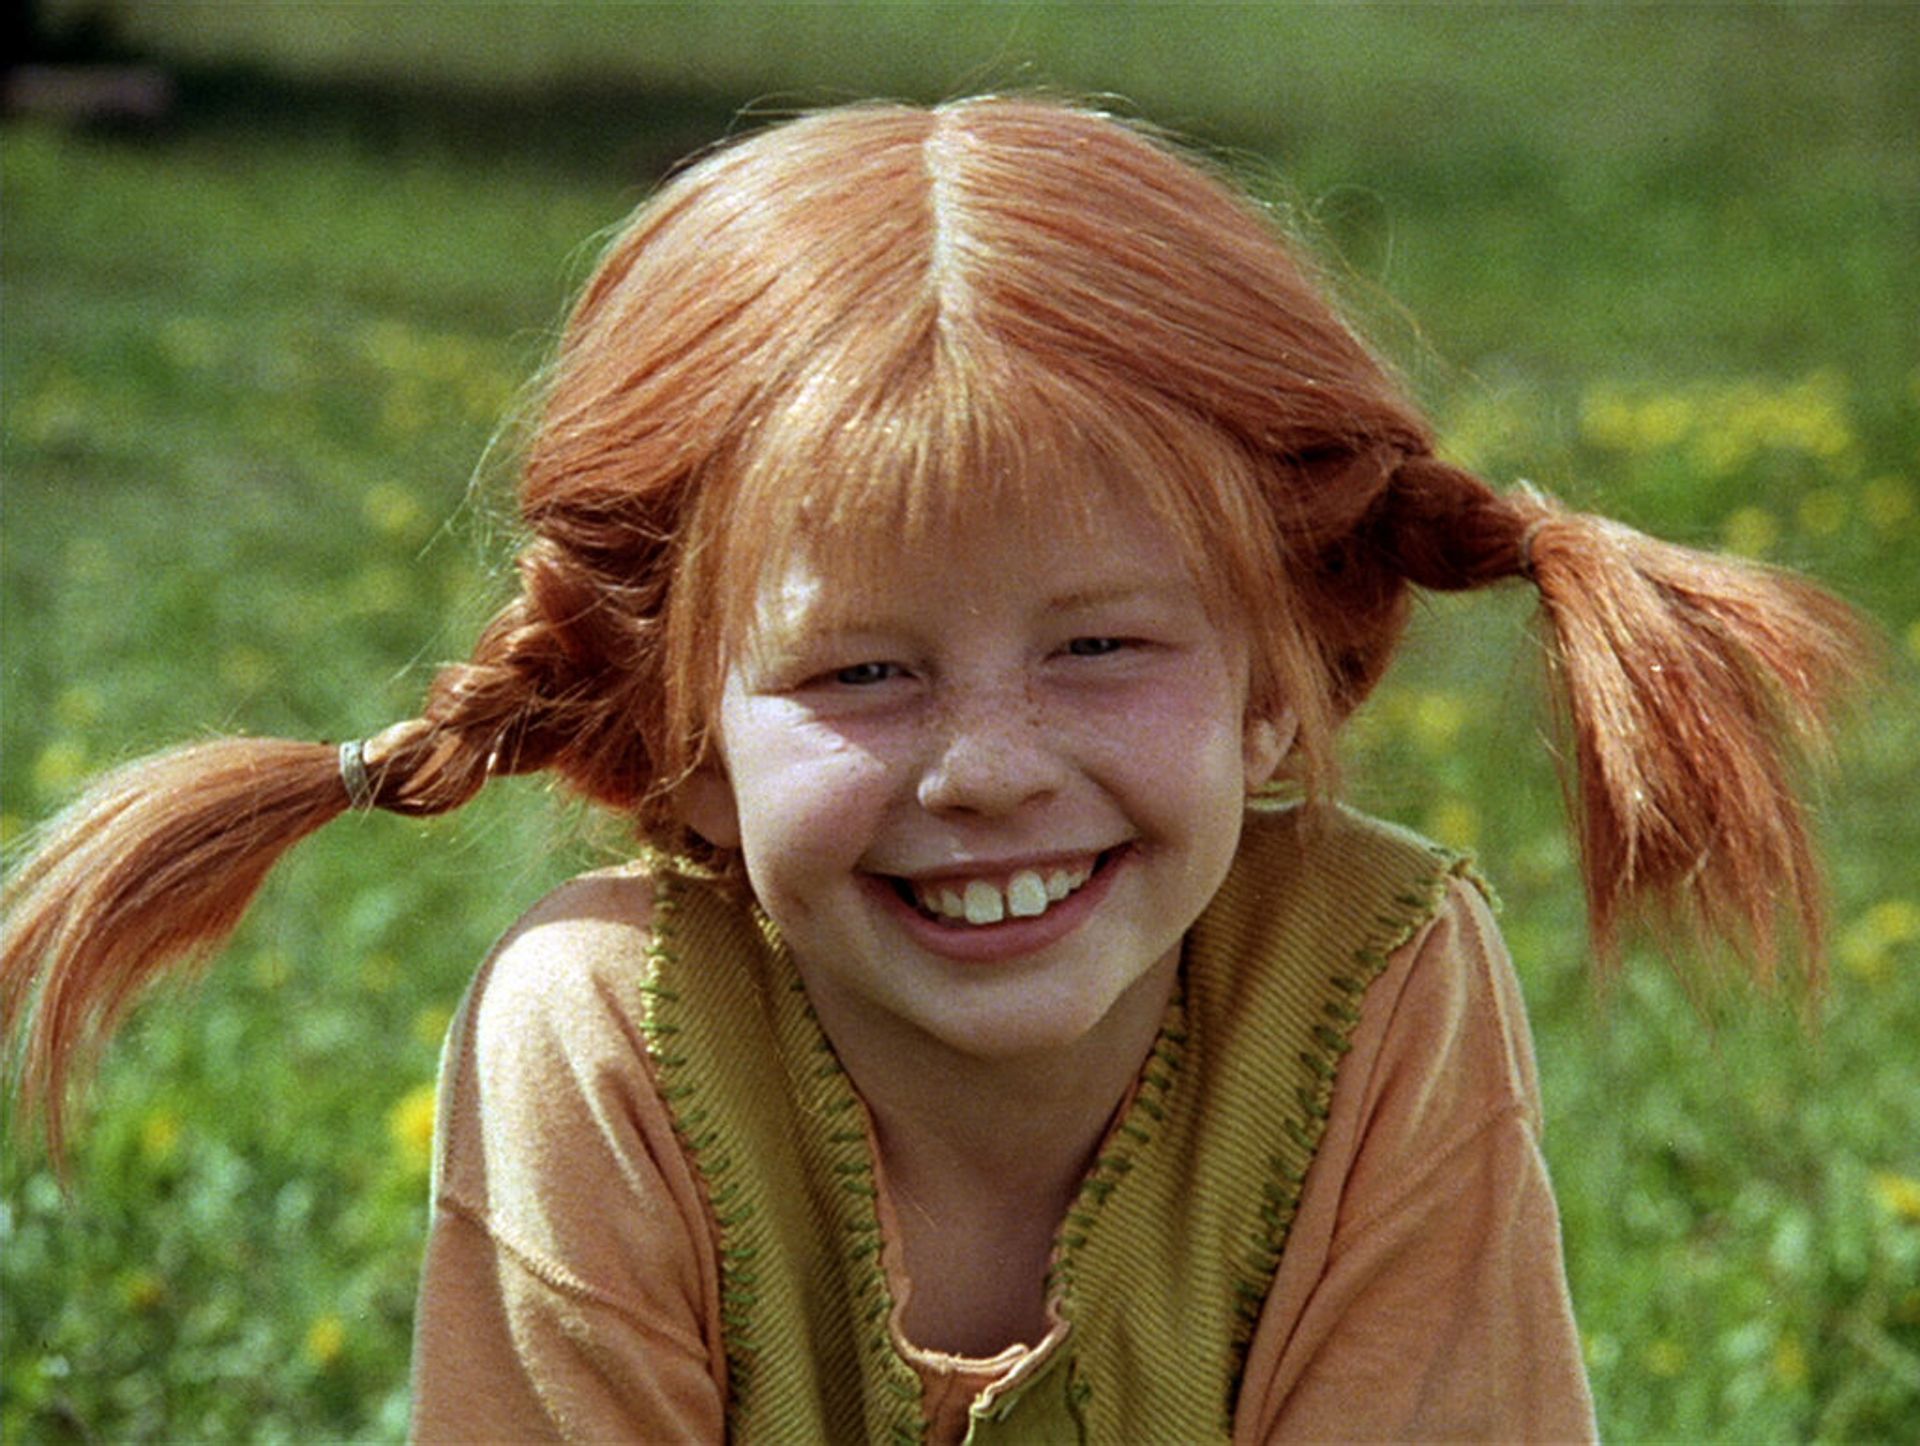 Cute little red-haired girl.